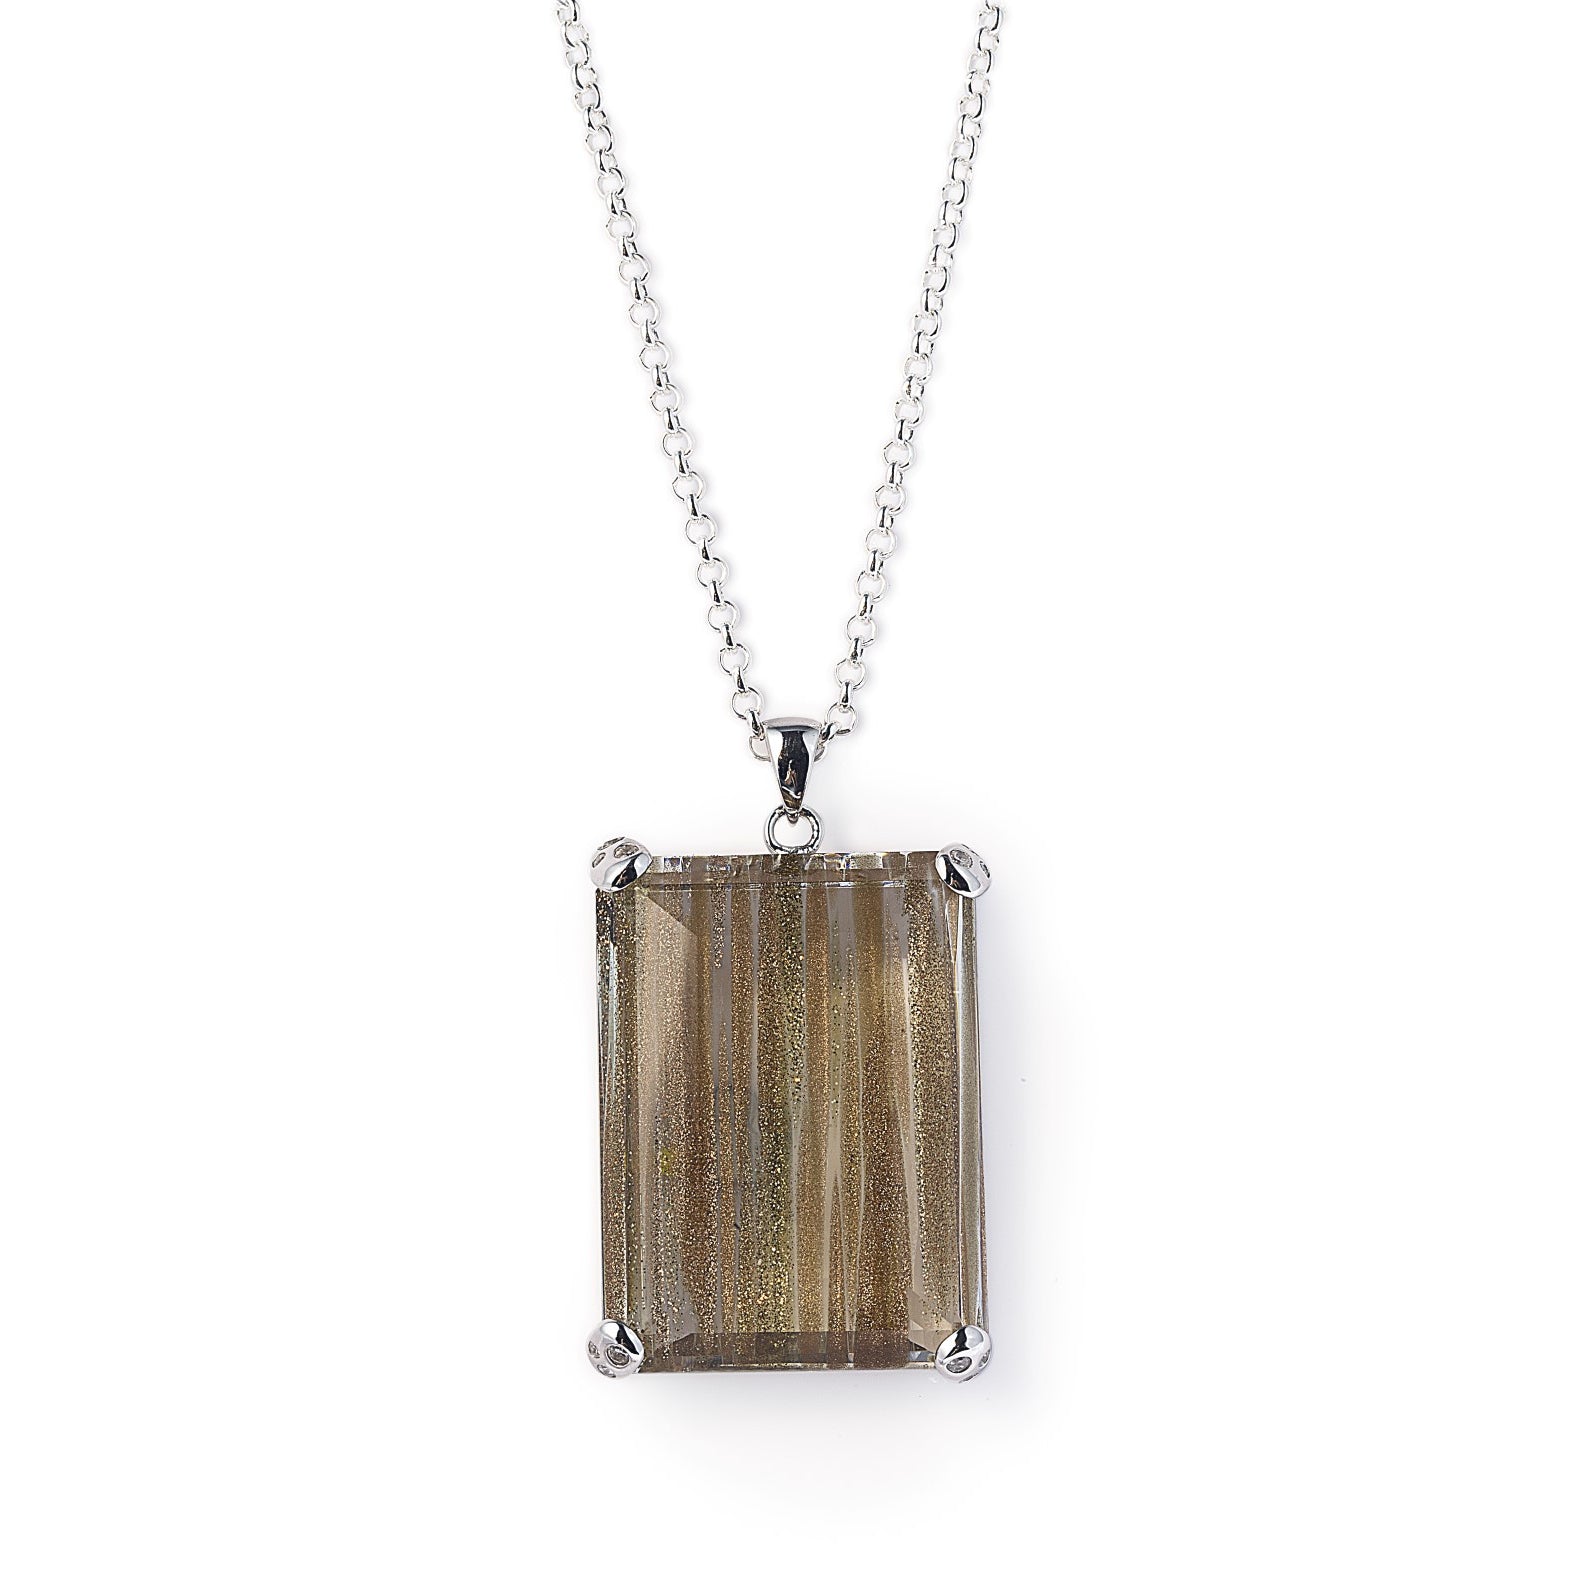 The elegant Sunkissed Beyonce Necklace is made of 925 sterling silver encasing a stunning large champagne obsidian for muted sparkle. Worldwide shipping. Affordable luxury jewellery by Bellagio & Co.